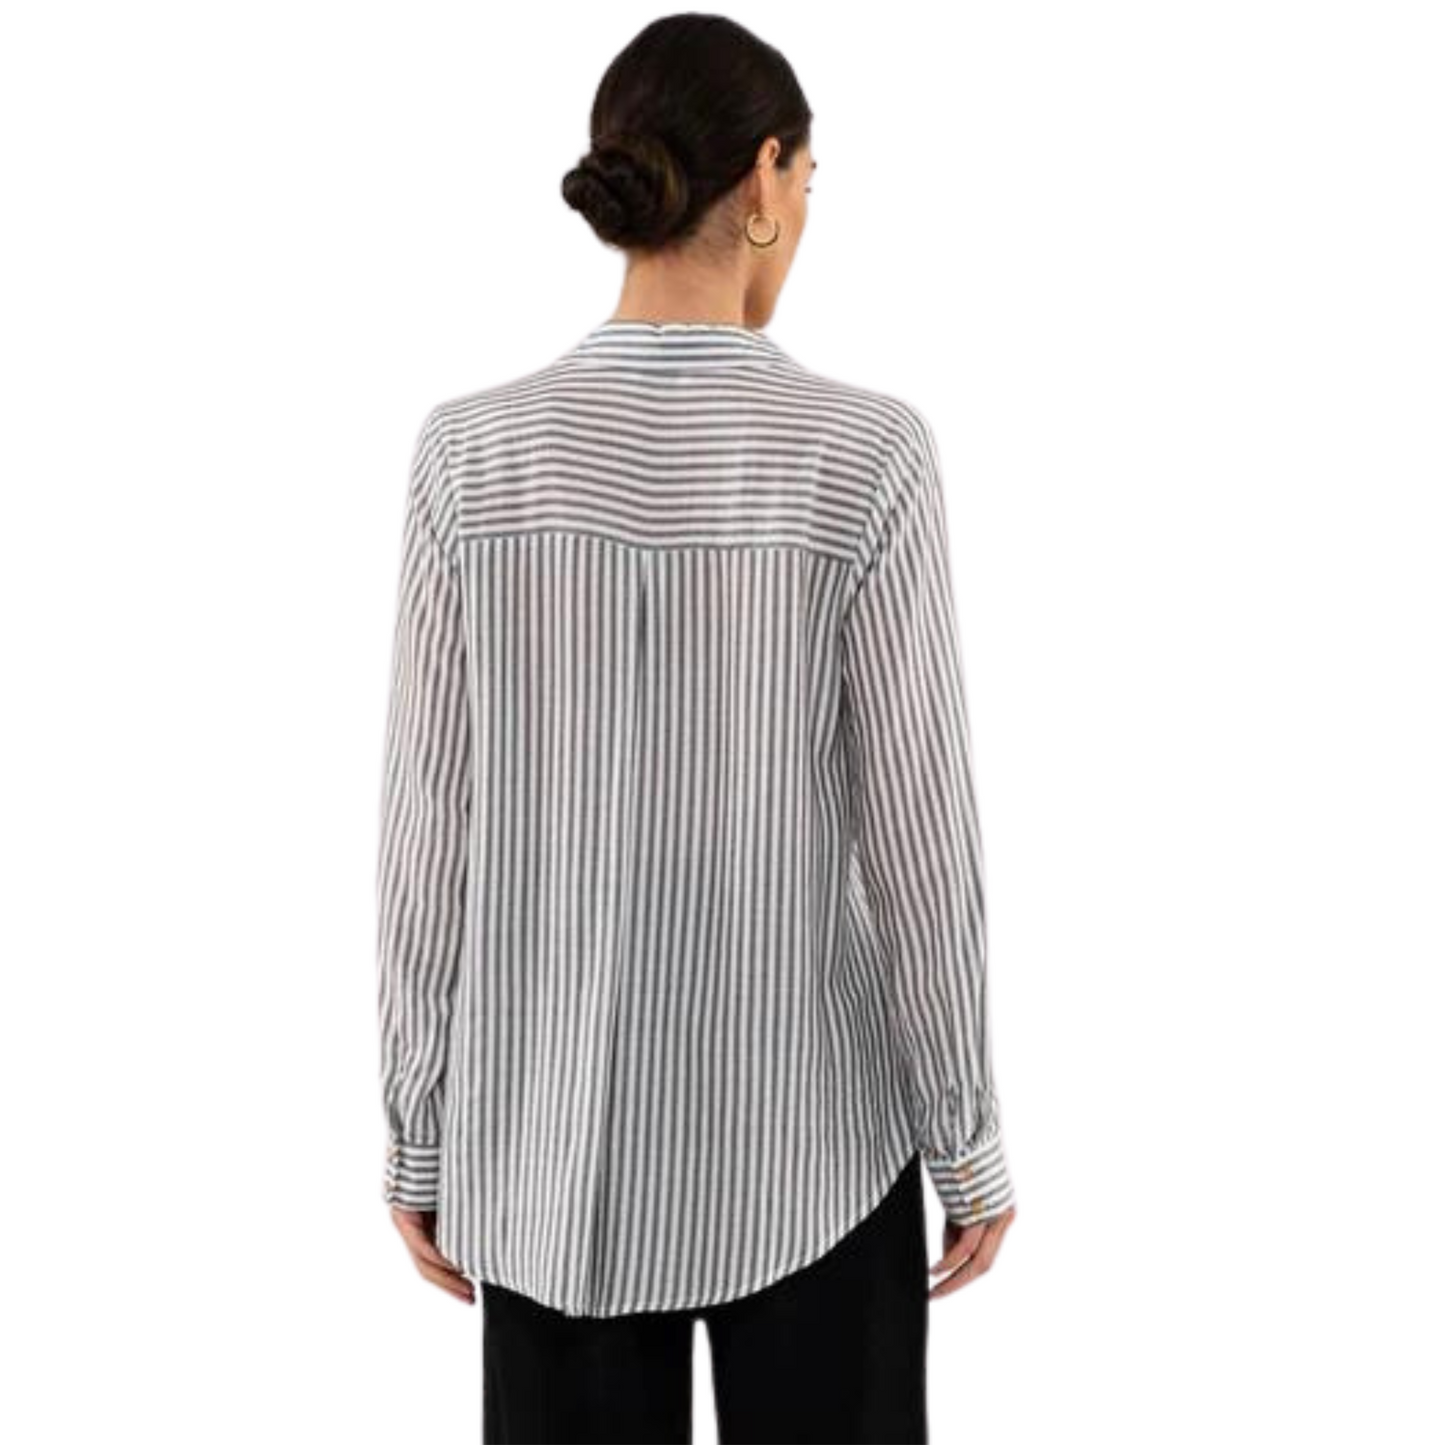 Striped woven top in black